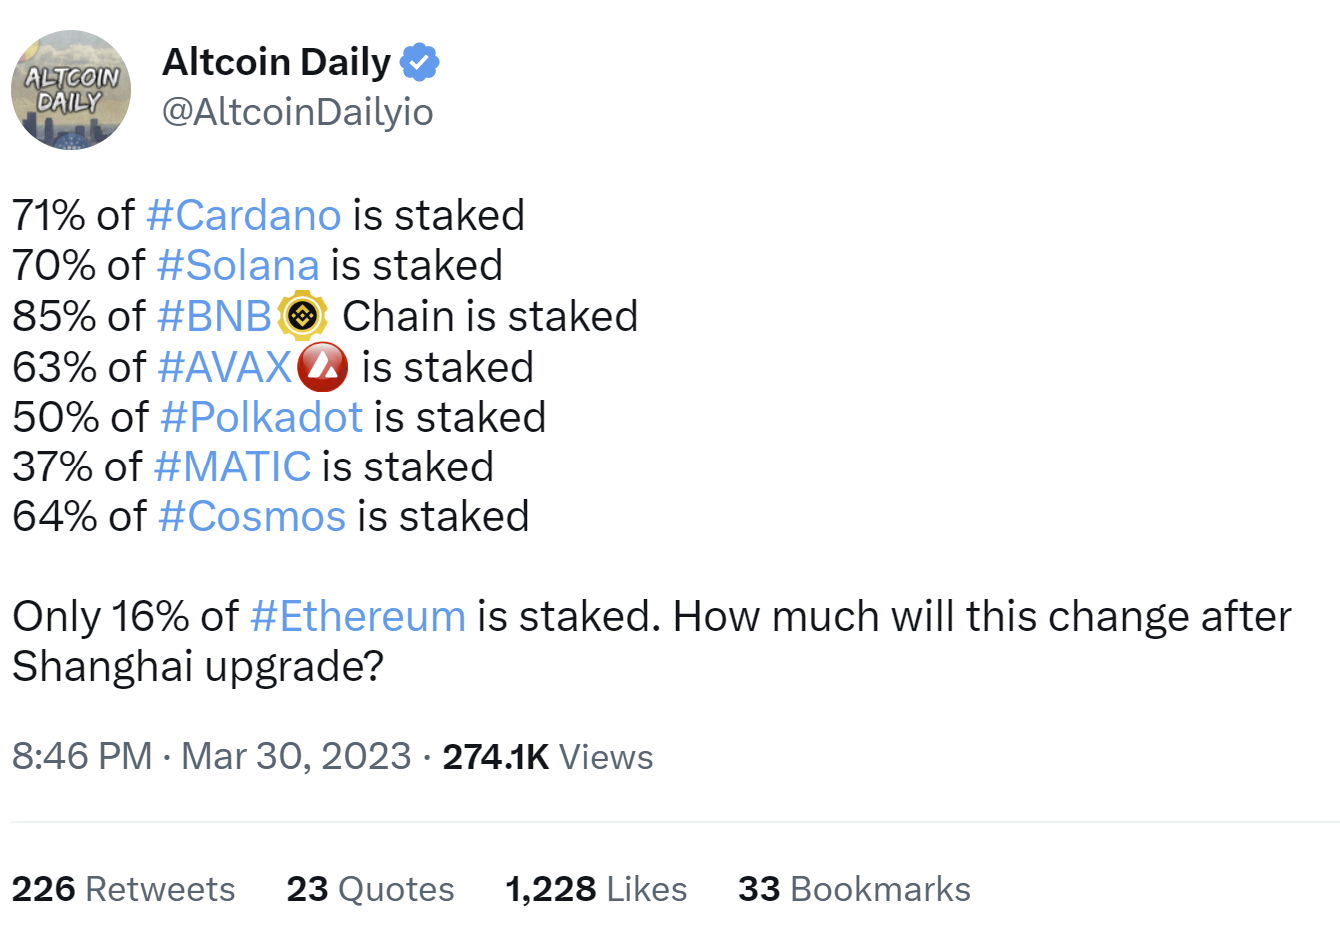 Tweet from Altcoin Daily illustrating the high proportions of staked crypto in proof-of-stake chains.